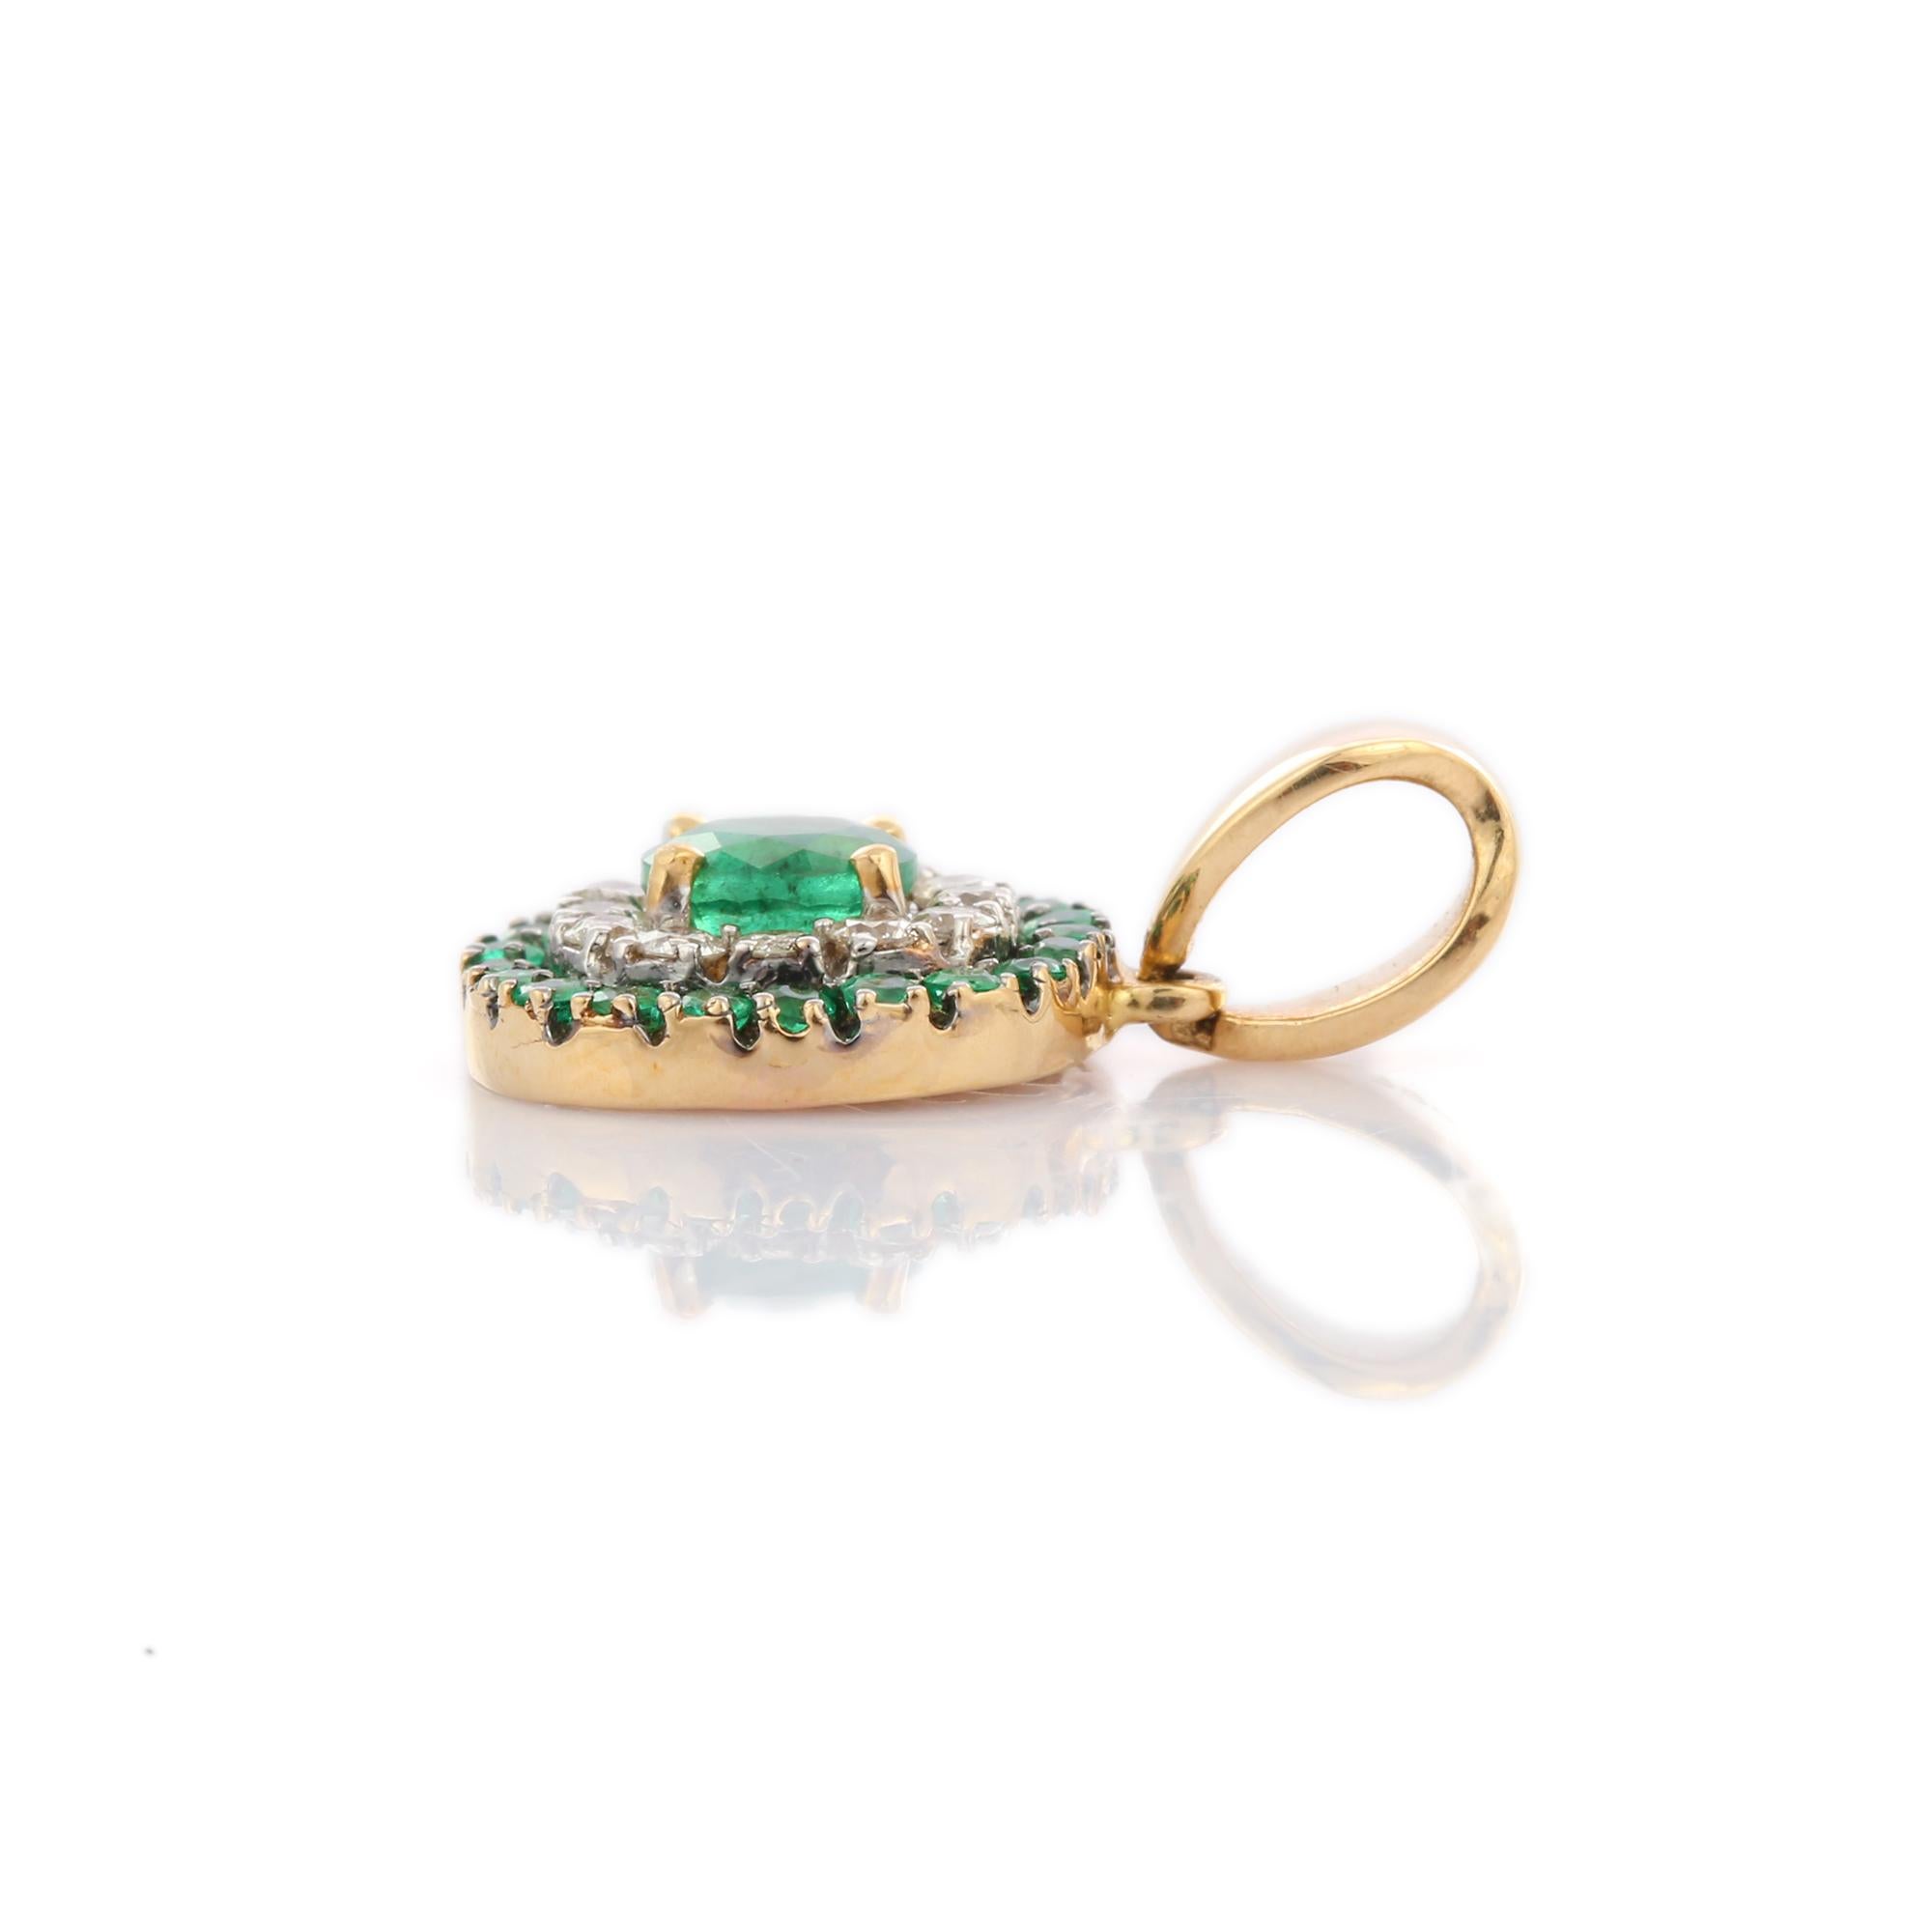 Natural Emerald pendant in 14K Gold. It has a round cut emerald studded with diamonds that completes your look with a decent touch. Pendants are used to wear or gifted to represent love and promises. It's an attractive jewelry piece that goes with